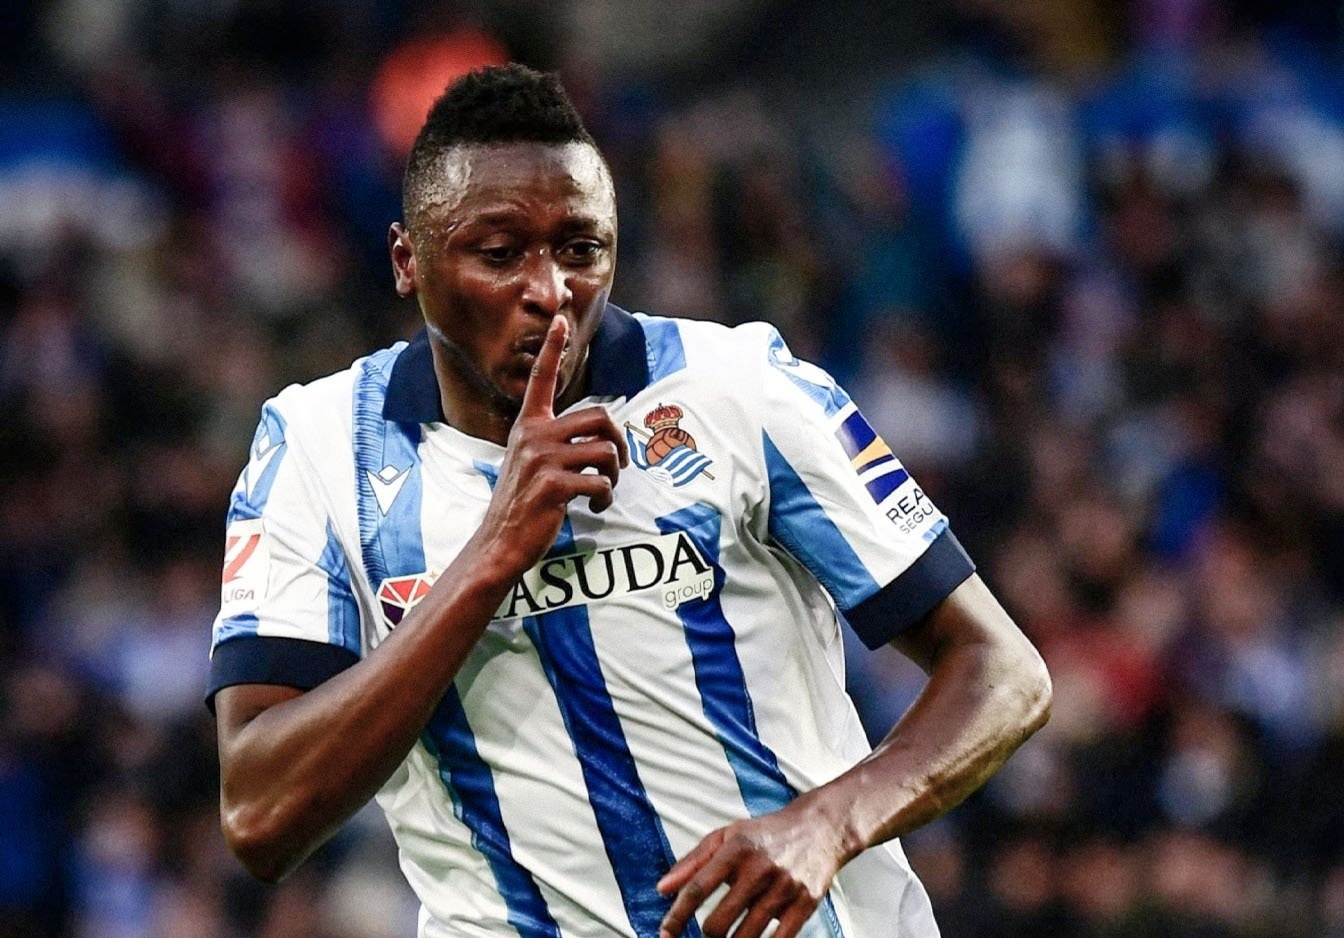 Sadiq Umar gets Getafe lifeline after disappointing campaign with Real Sociedad